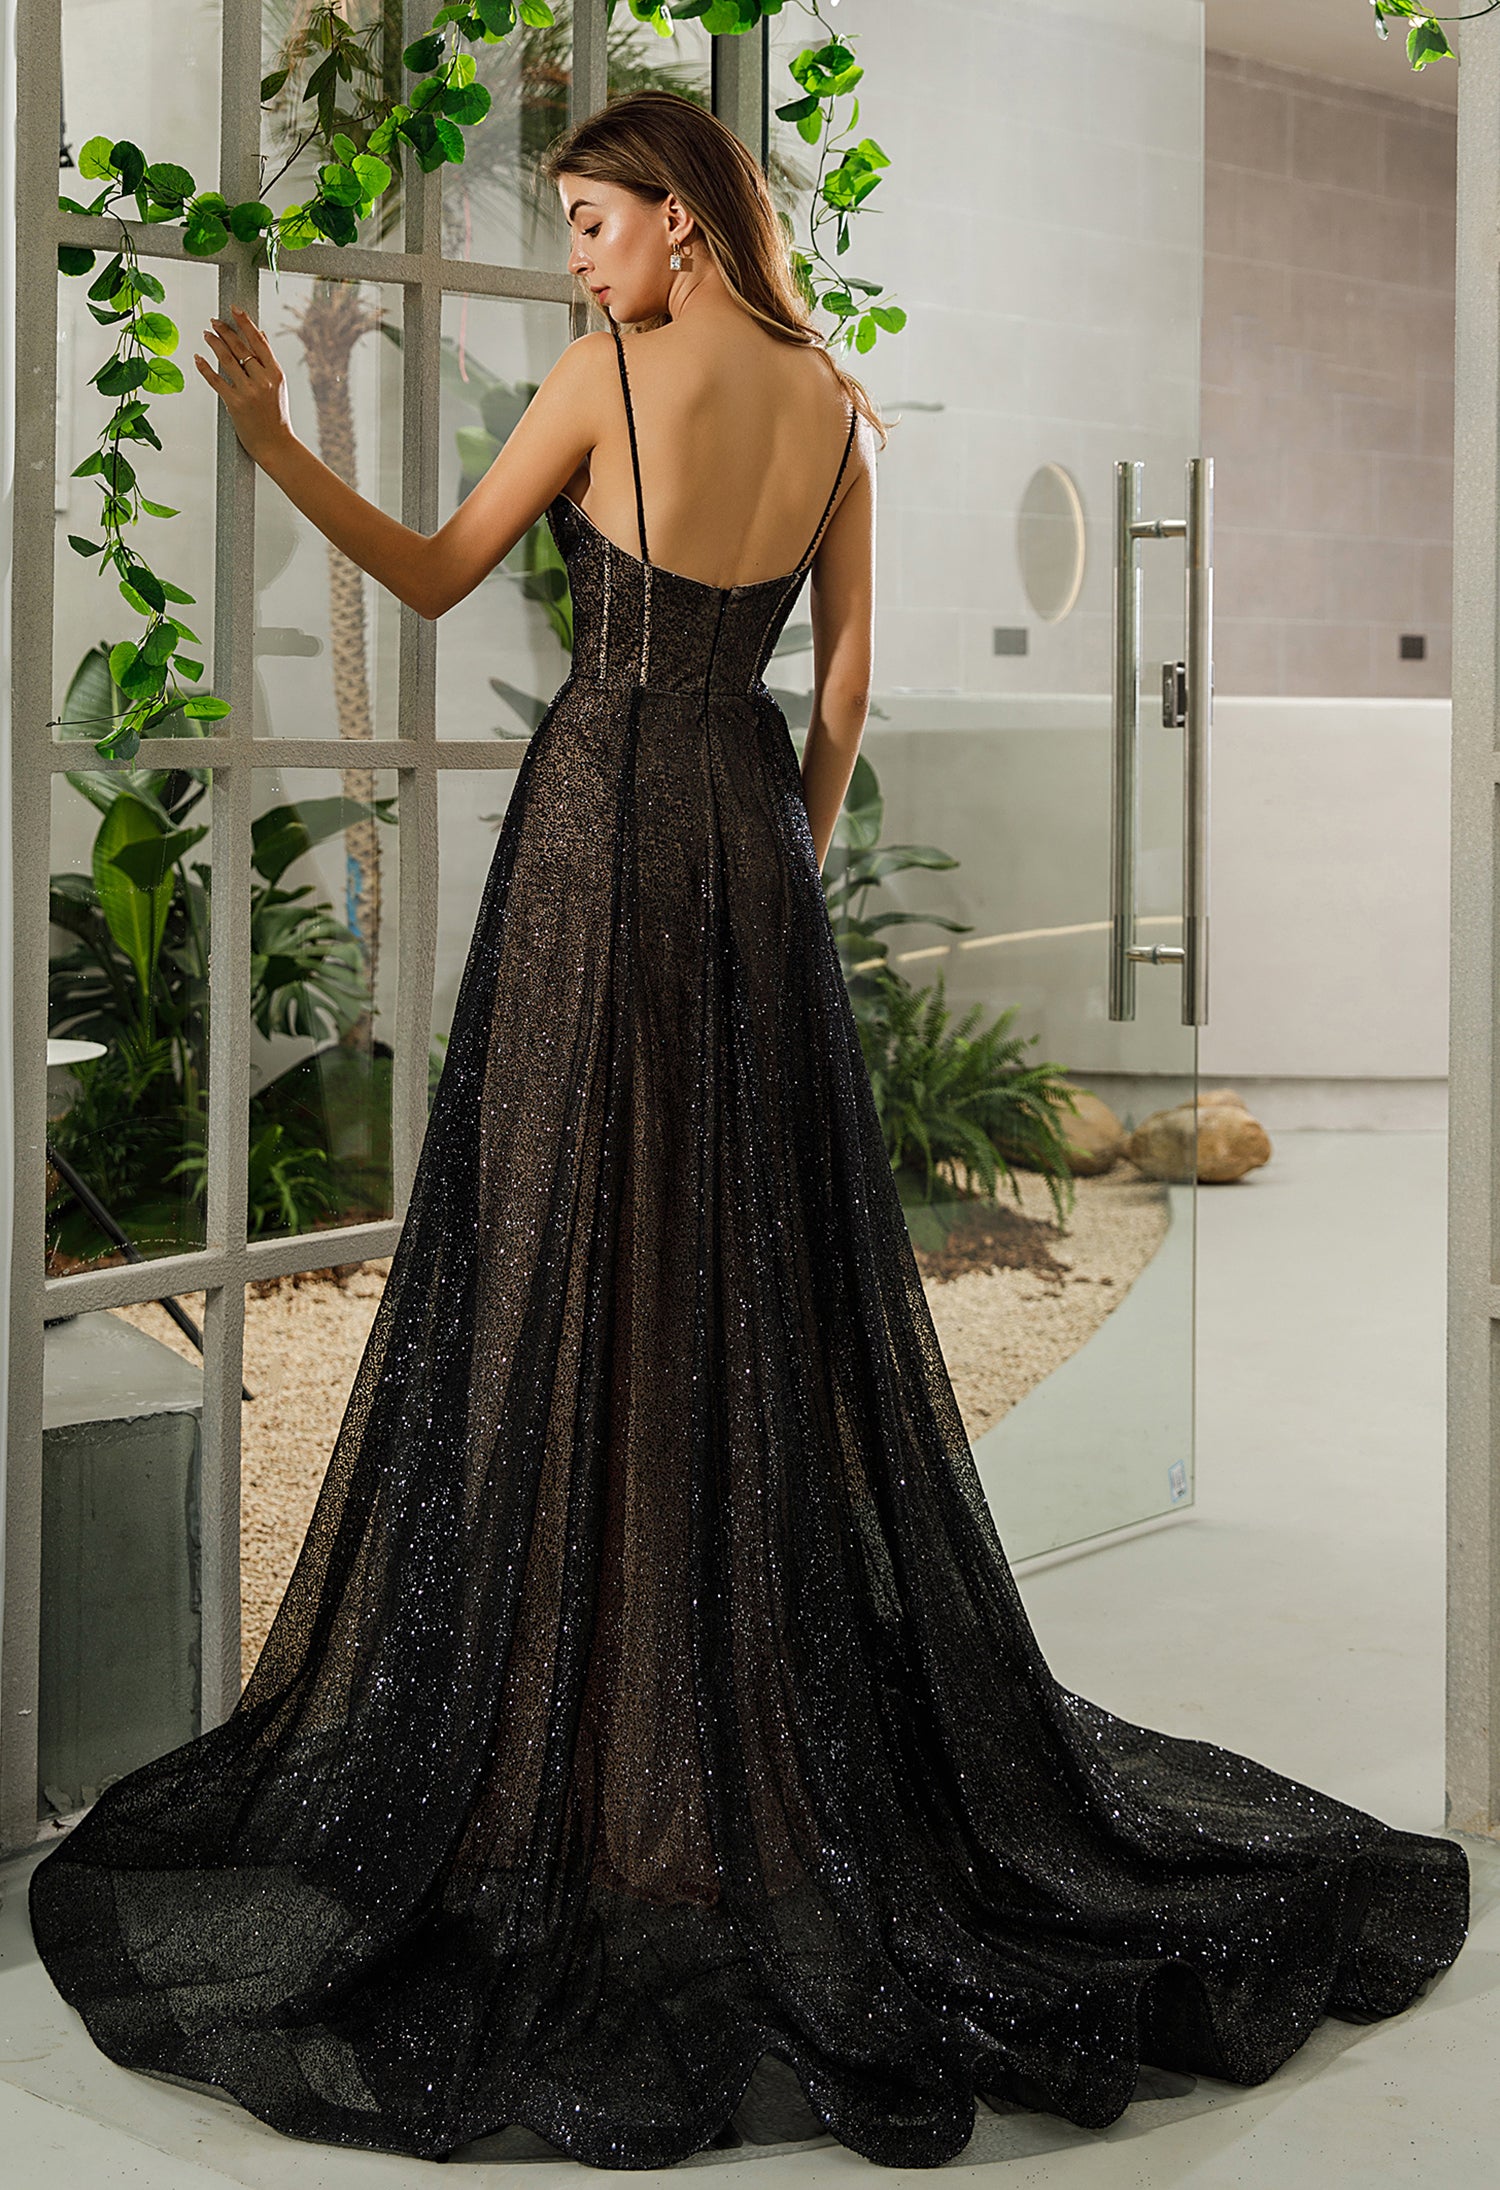 A woman in a Visible Boning Corset Black A-Line Bridal Gown from Bergamot Bridal is standing in front of a window at a bridal shop.